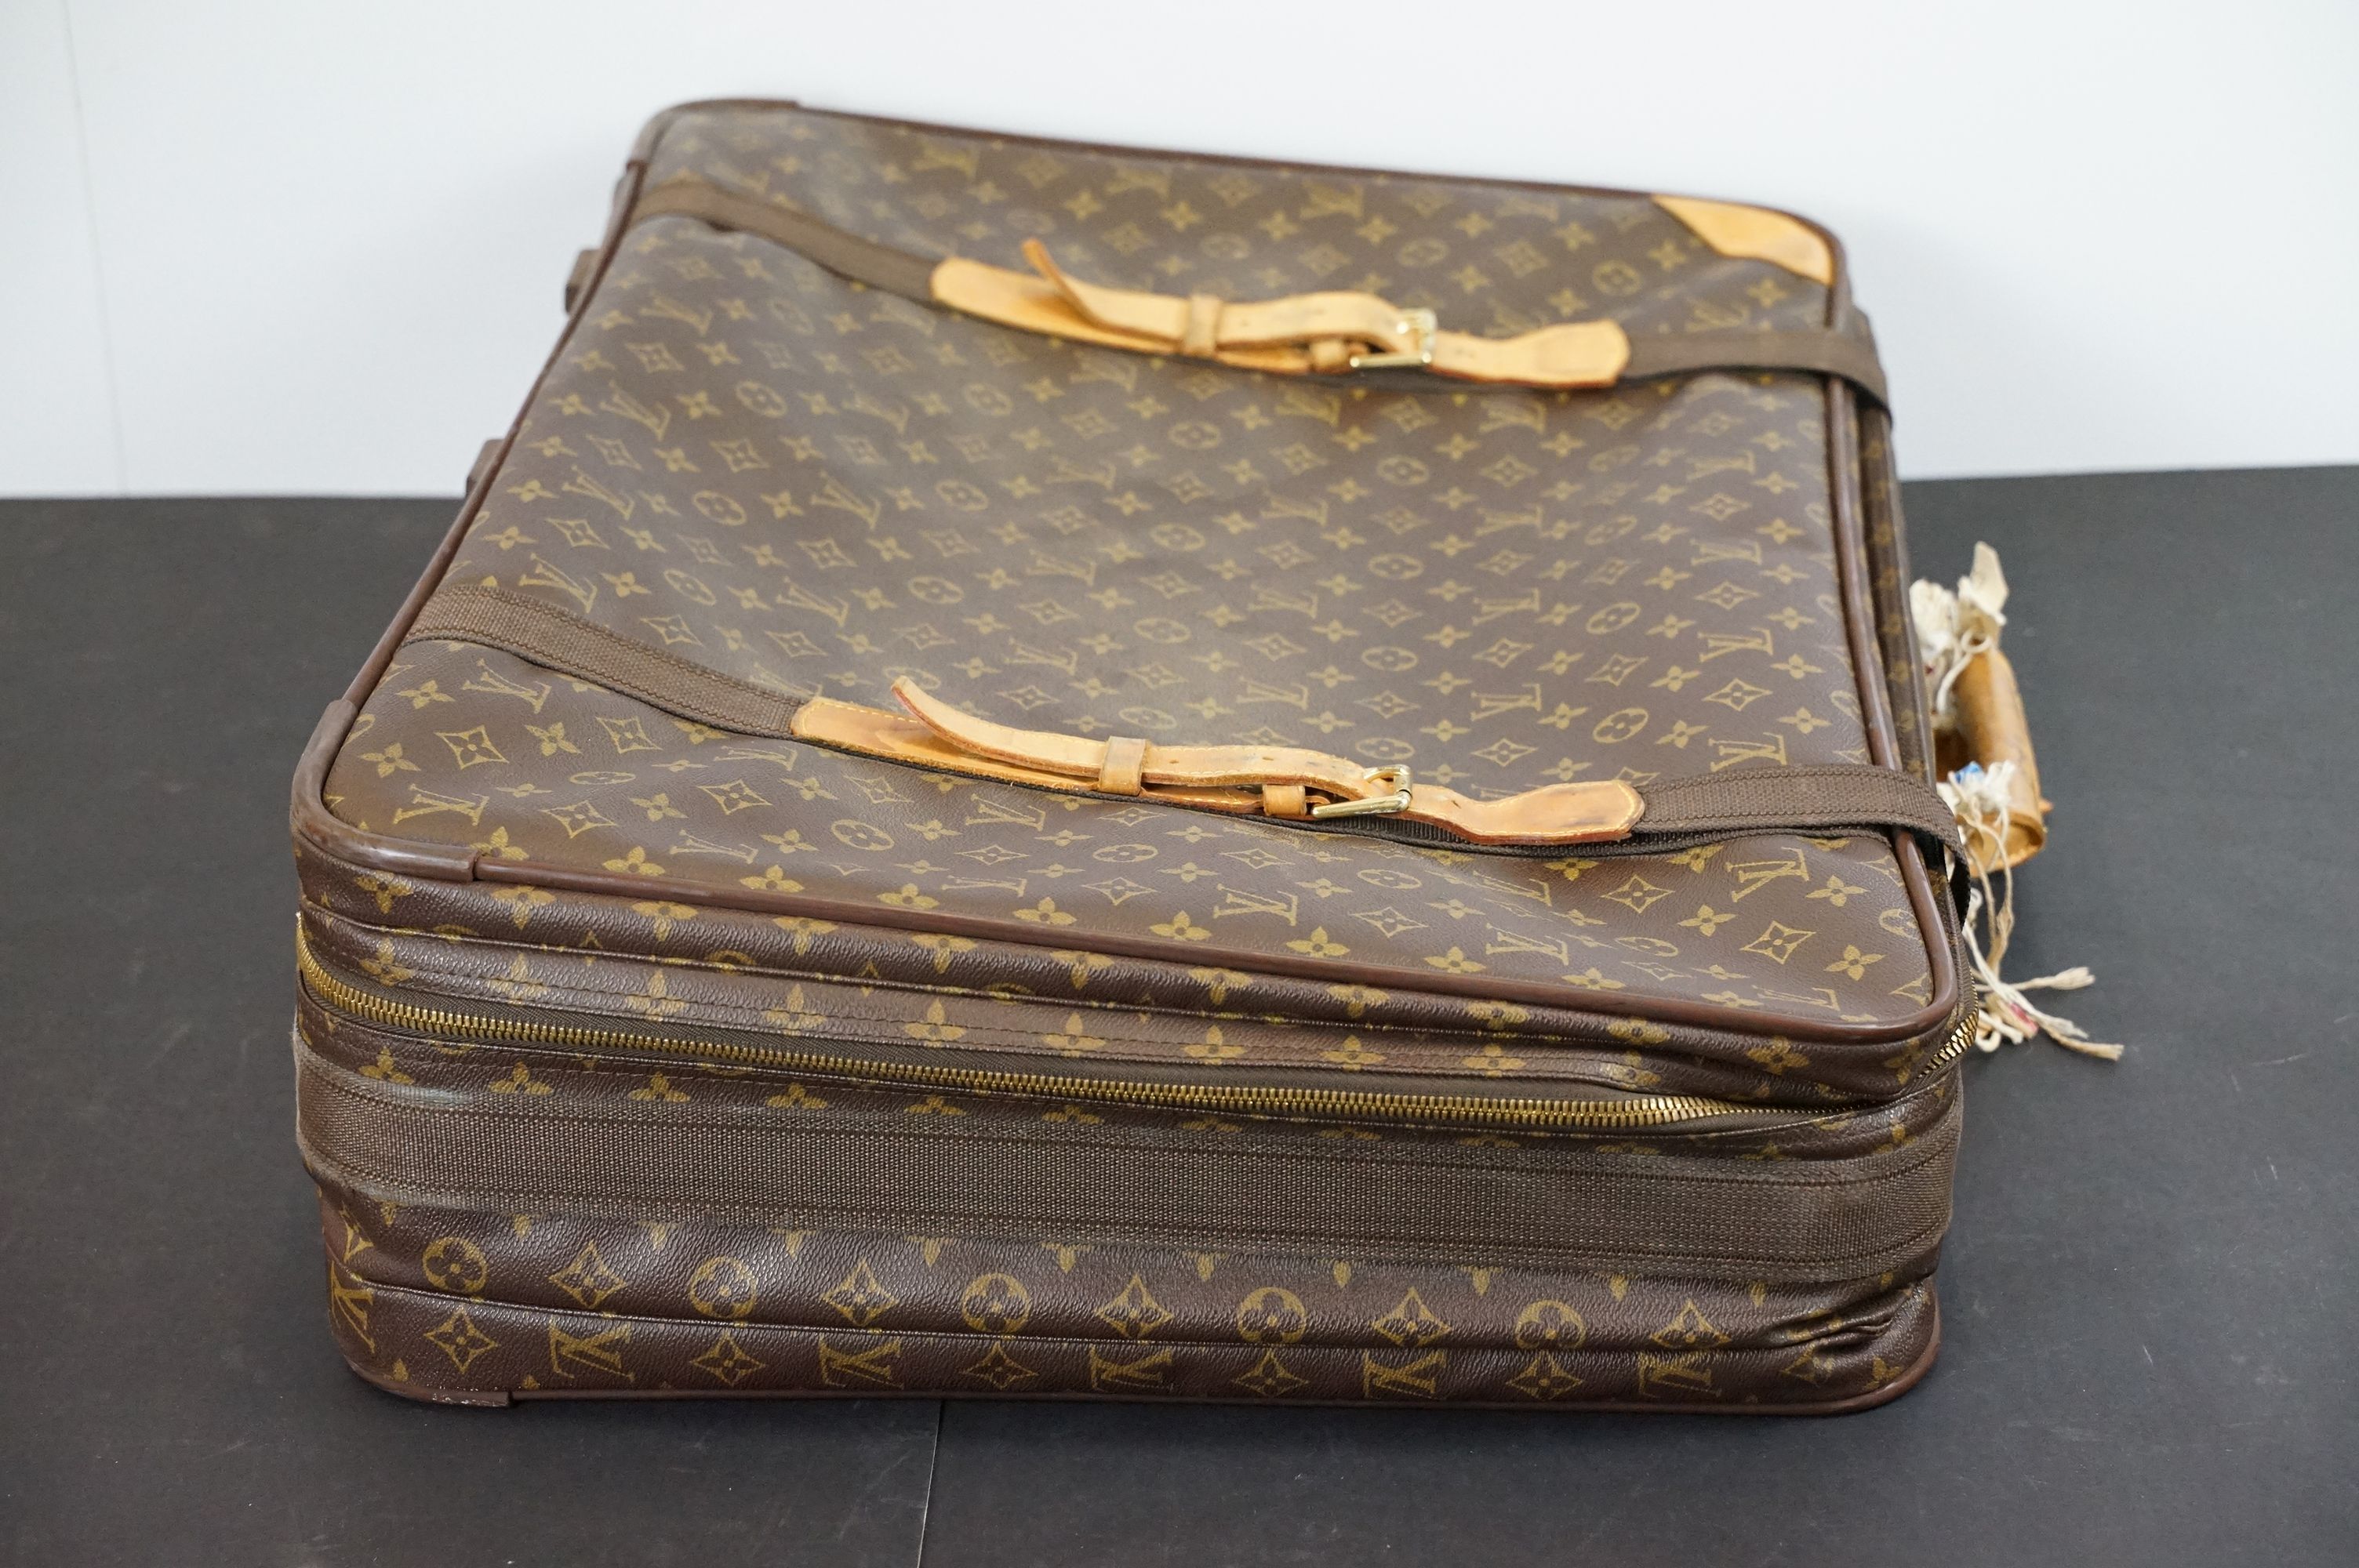 Louis Vuitton - Satellite suitcase having a monogrammed body with two canvas straps and brown - Image 7 of 18